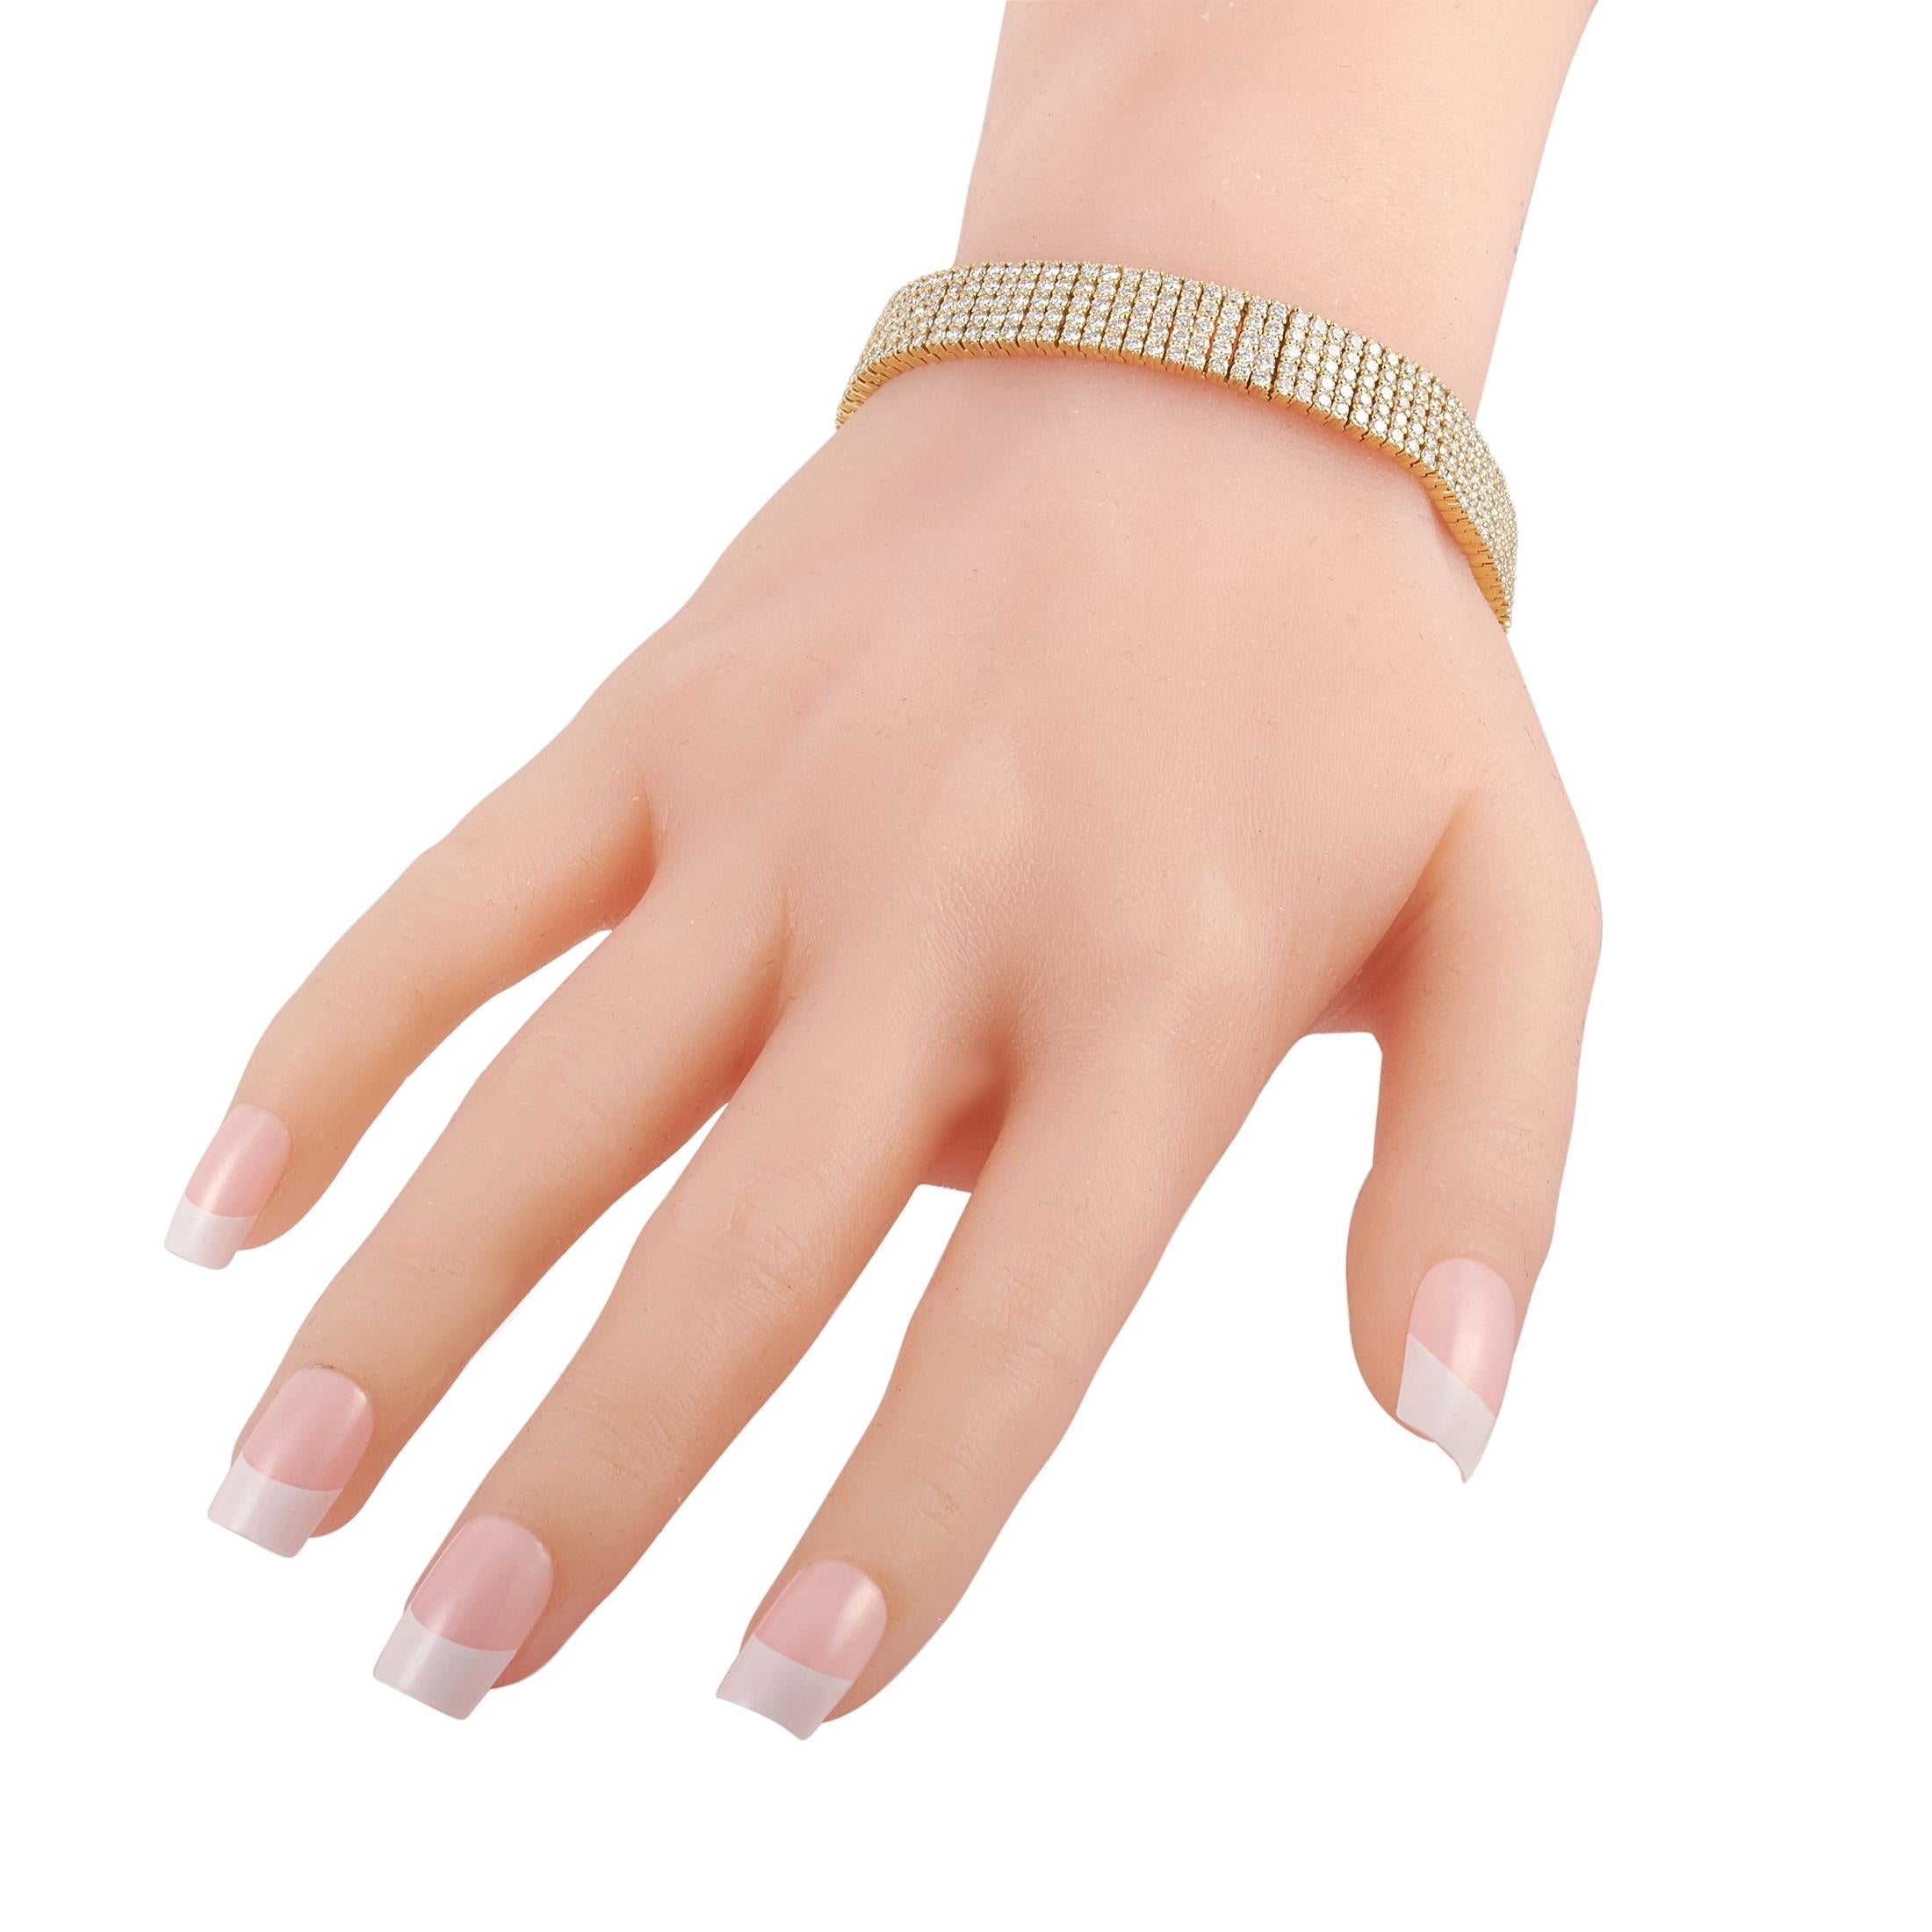 The LB Exclusive 18K Yellow Gold 10.59 carat Five Row Diamond Mesh Bracelet is a classy piece of jewelry that never goes out of style. This piece is designed with five rows of diamonds wrapping all the way around the wrist. The glittering wide